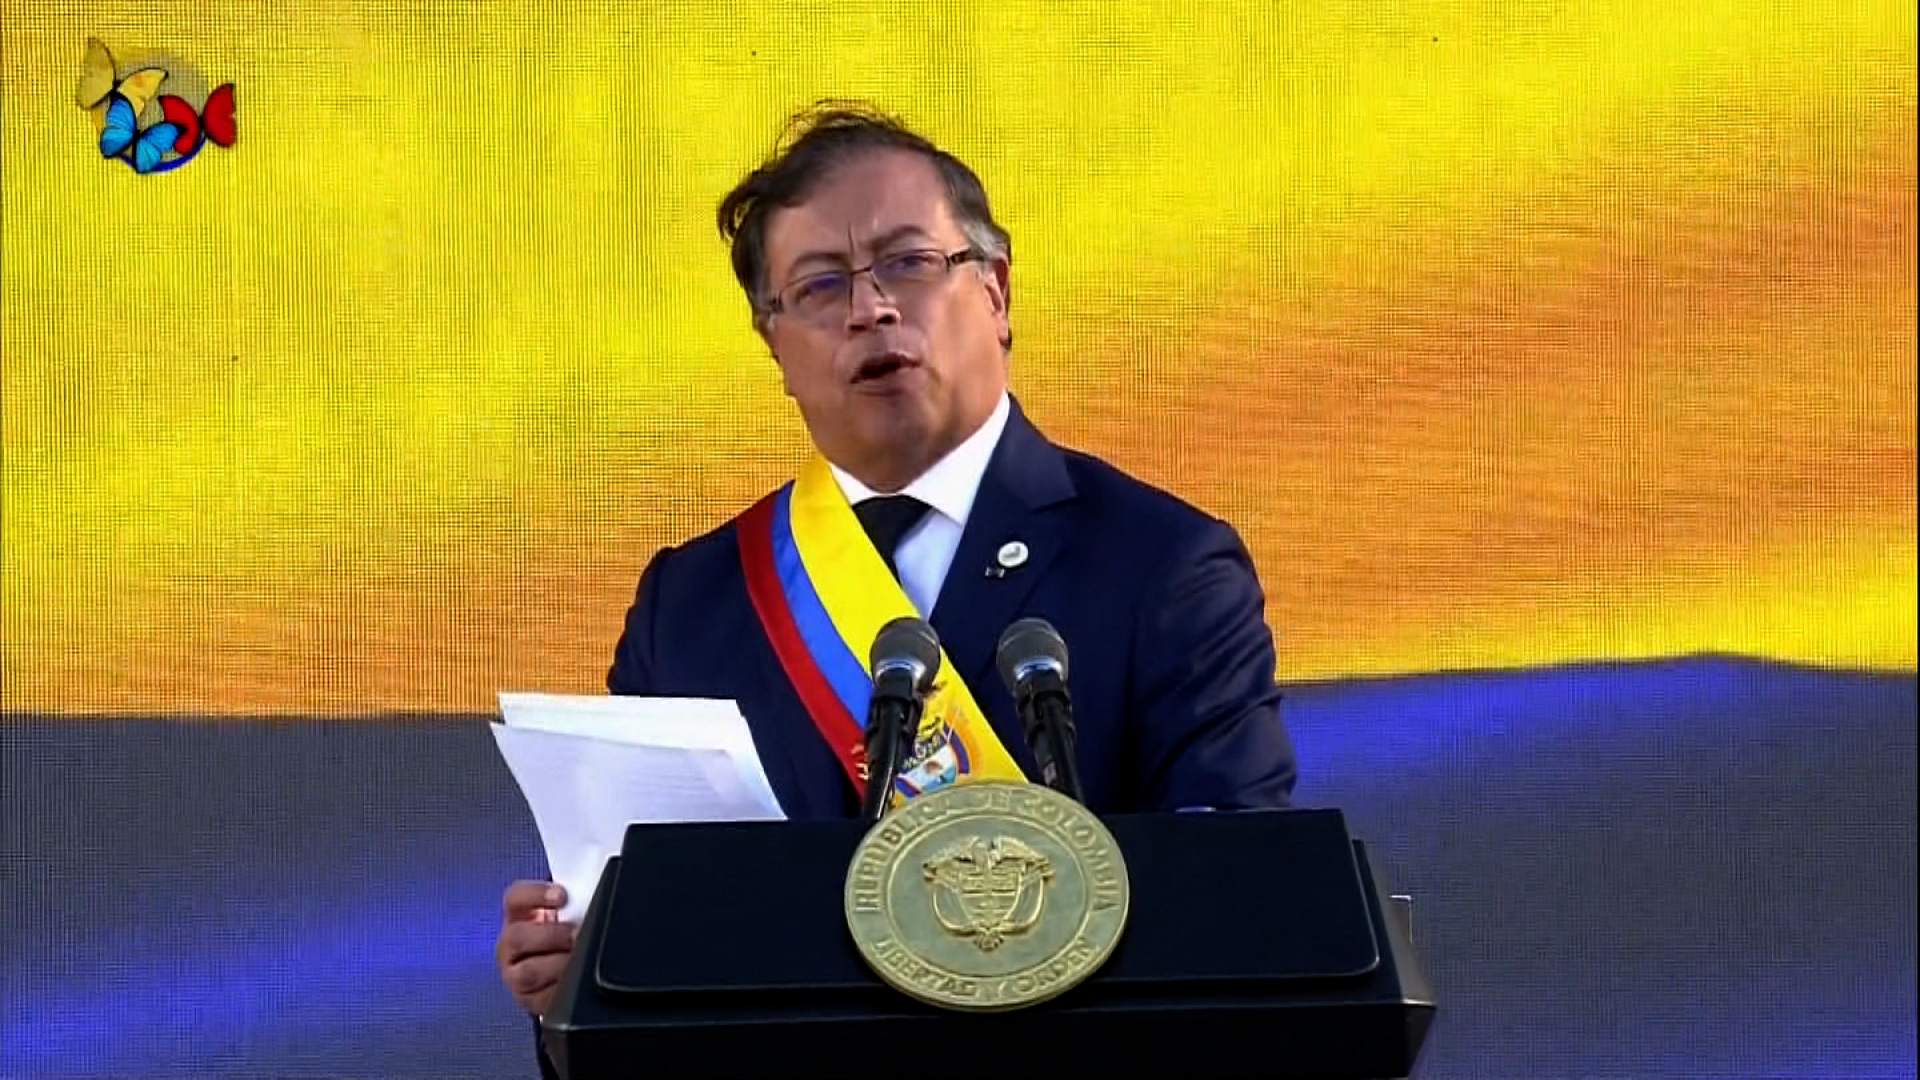 Gustavo Pedro's inauguration as President of Colombia is live